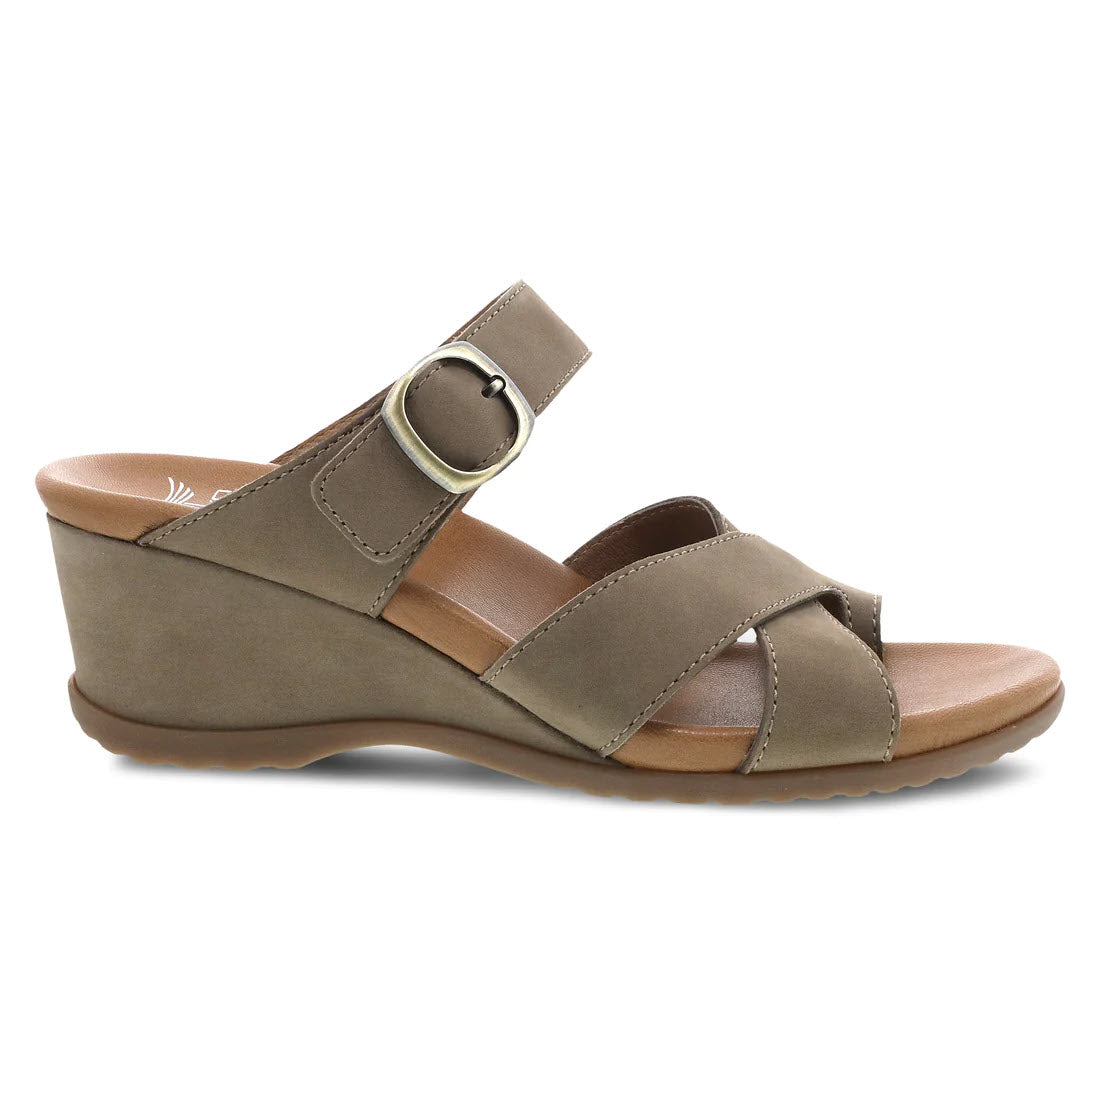 A single DANSKO AUBREE TAUPE NUBUCK - WOMENS open back wedge sandal with nubuck uppers, multiple straps, and a buckle closure, isolated on a white background.